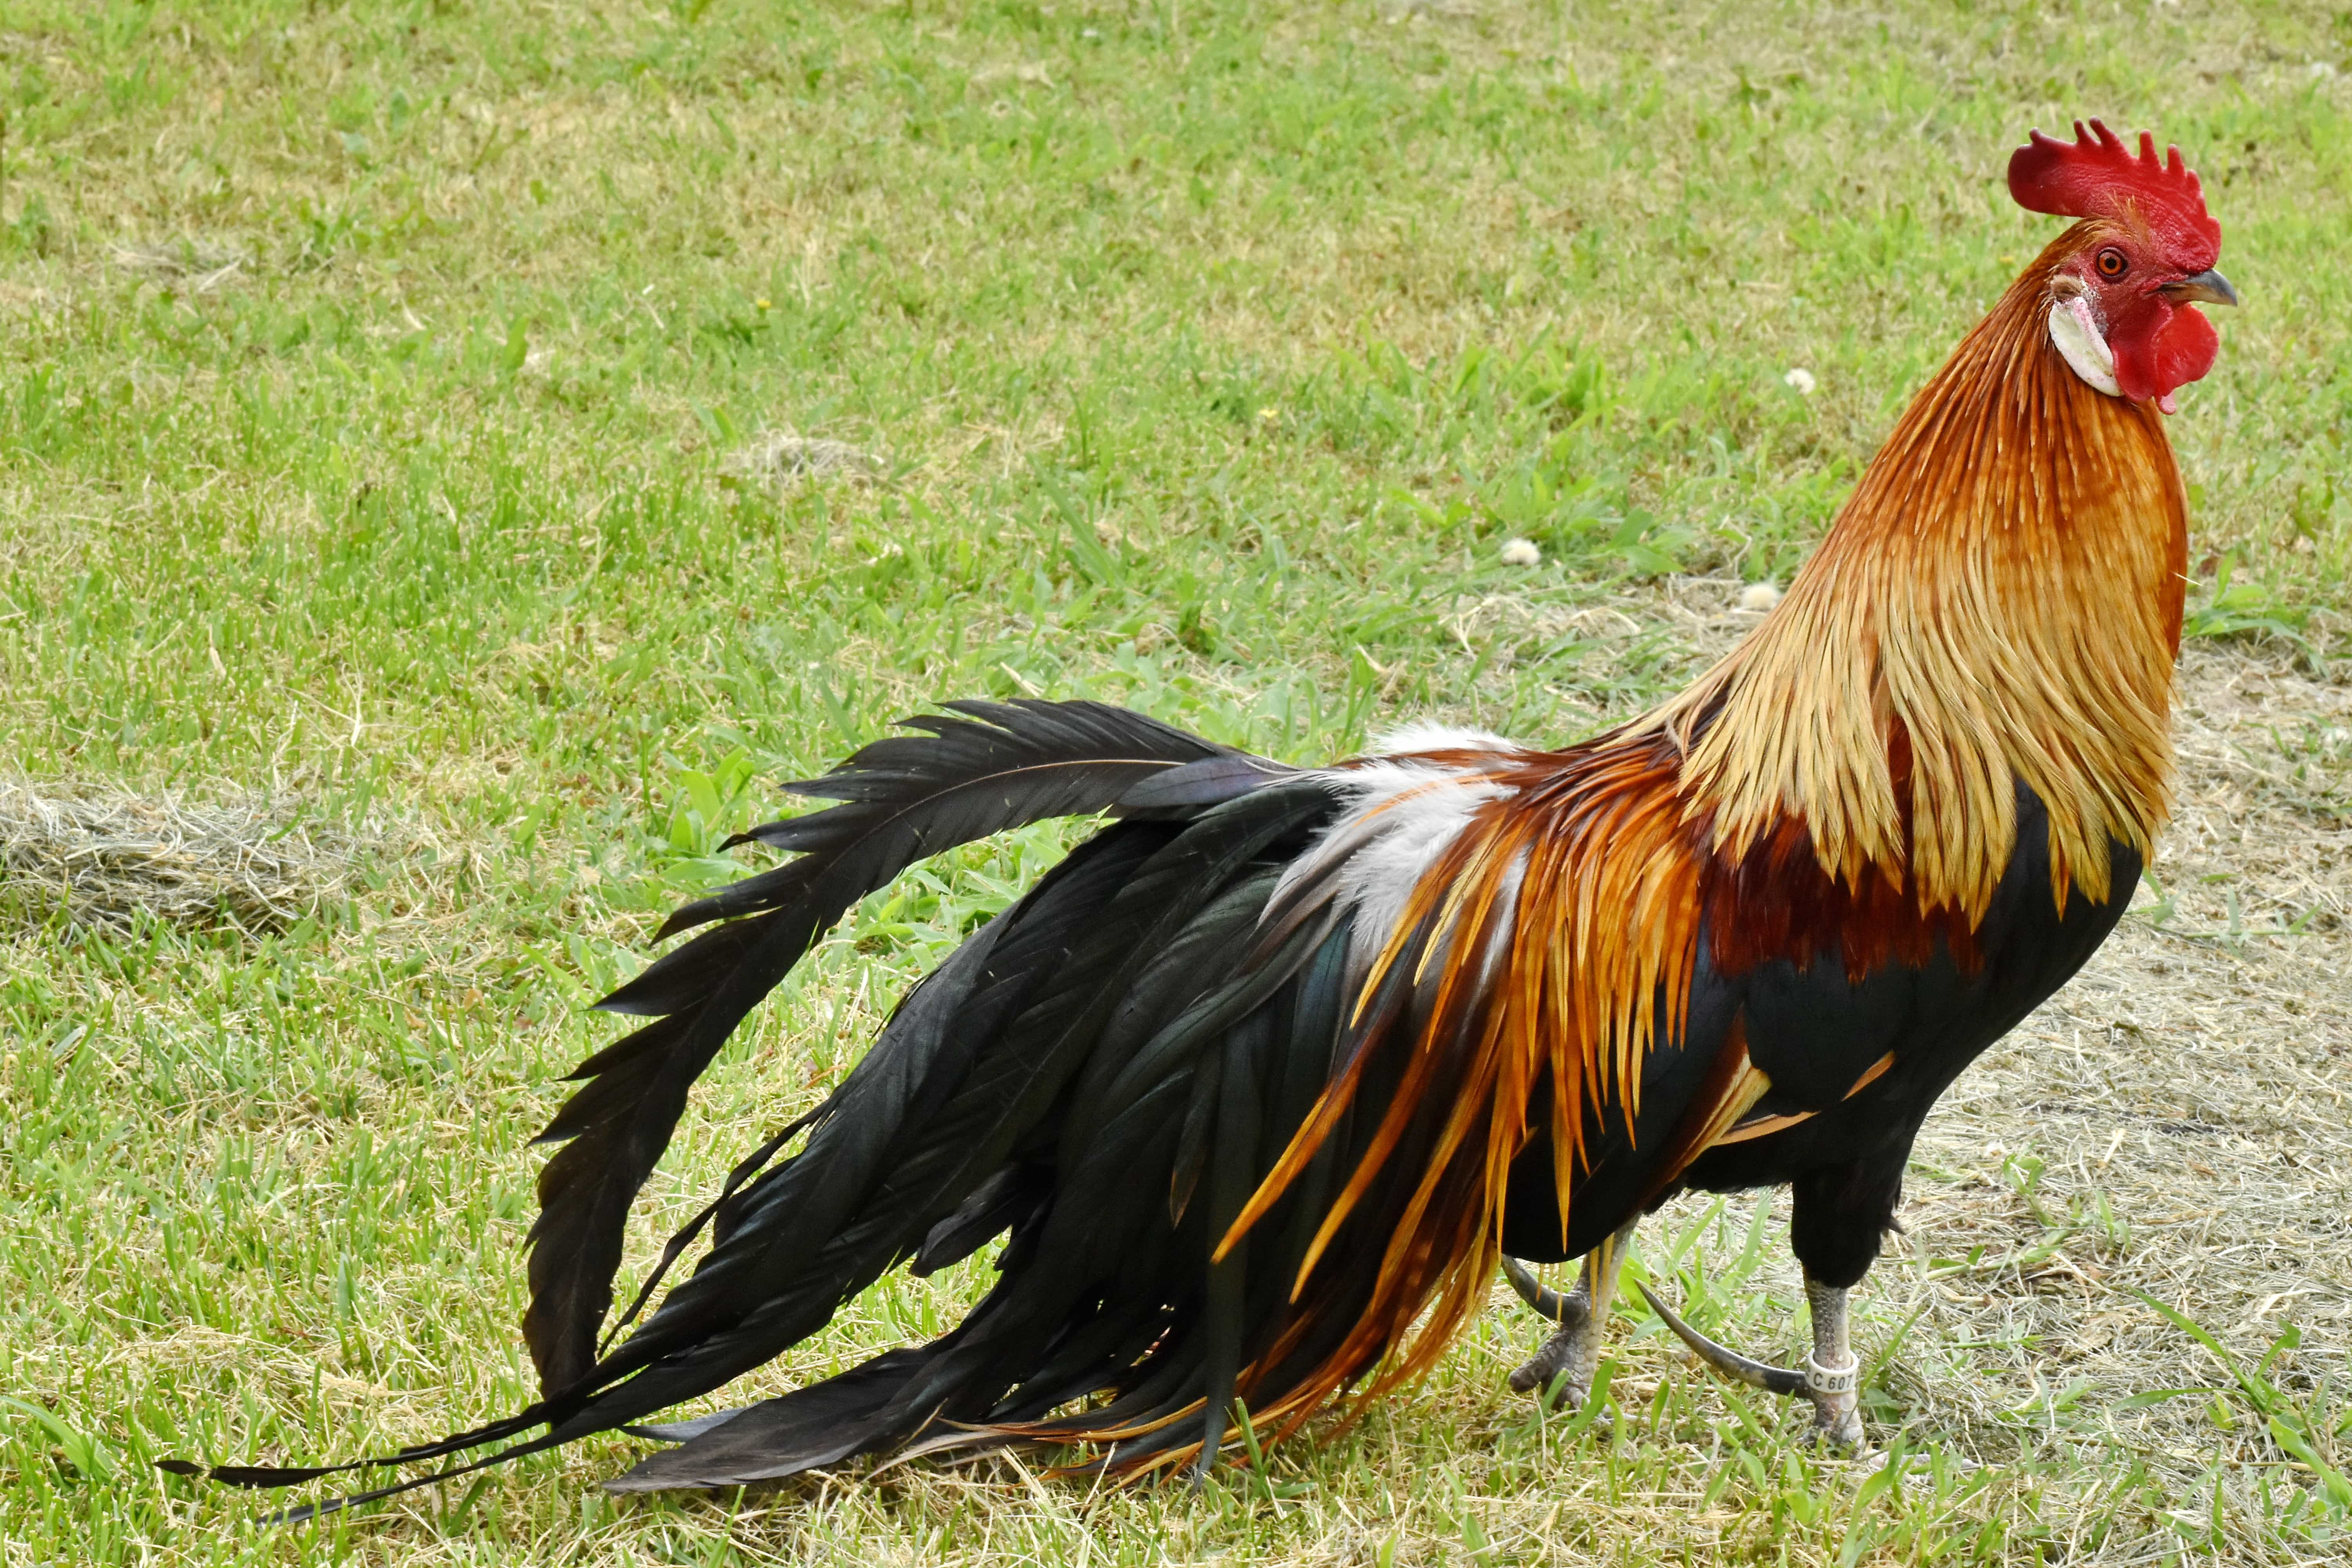 Free picture: animal, colorful, feather, plumage, rooster, tail, farm, bird,  grass, rural